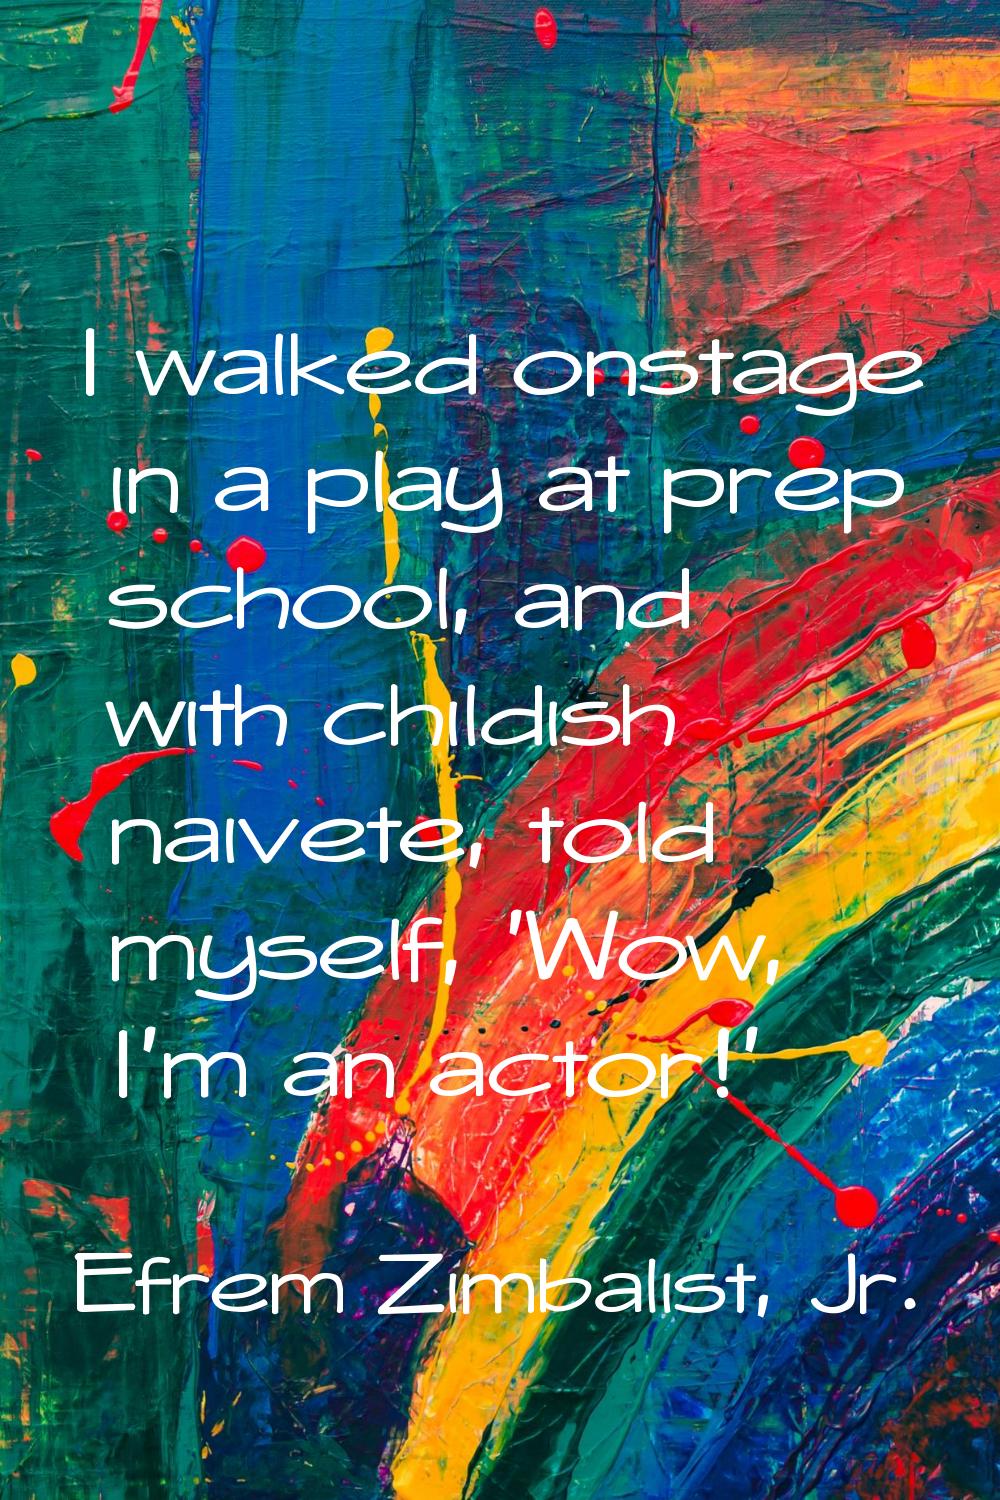 I walked onstage in a play at prep school, and with childish naivete, told myself, 'Wow, I'm an act